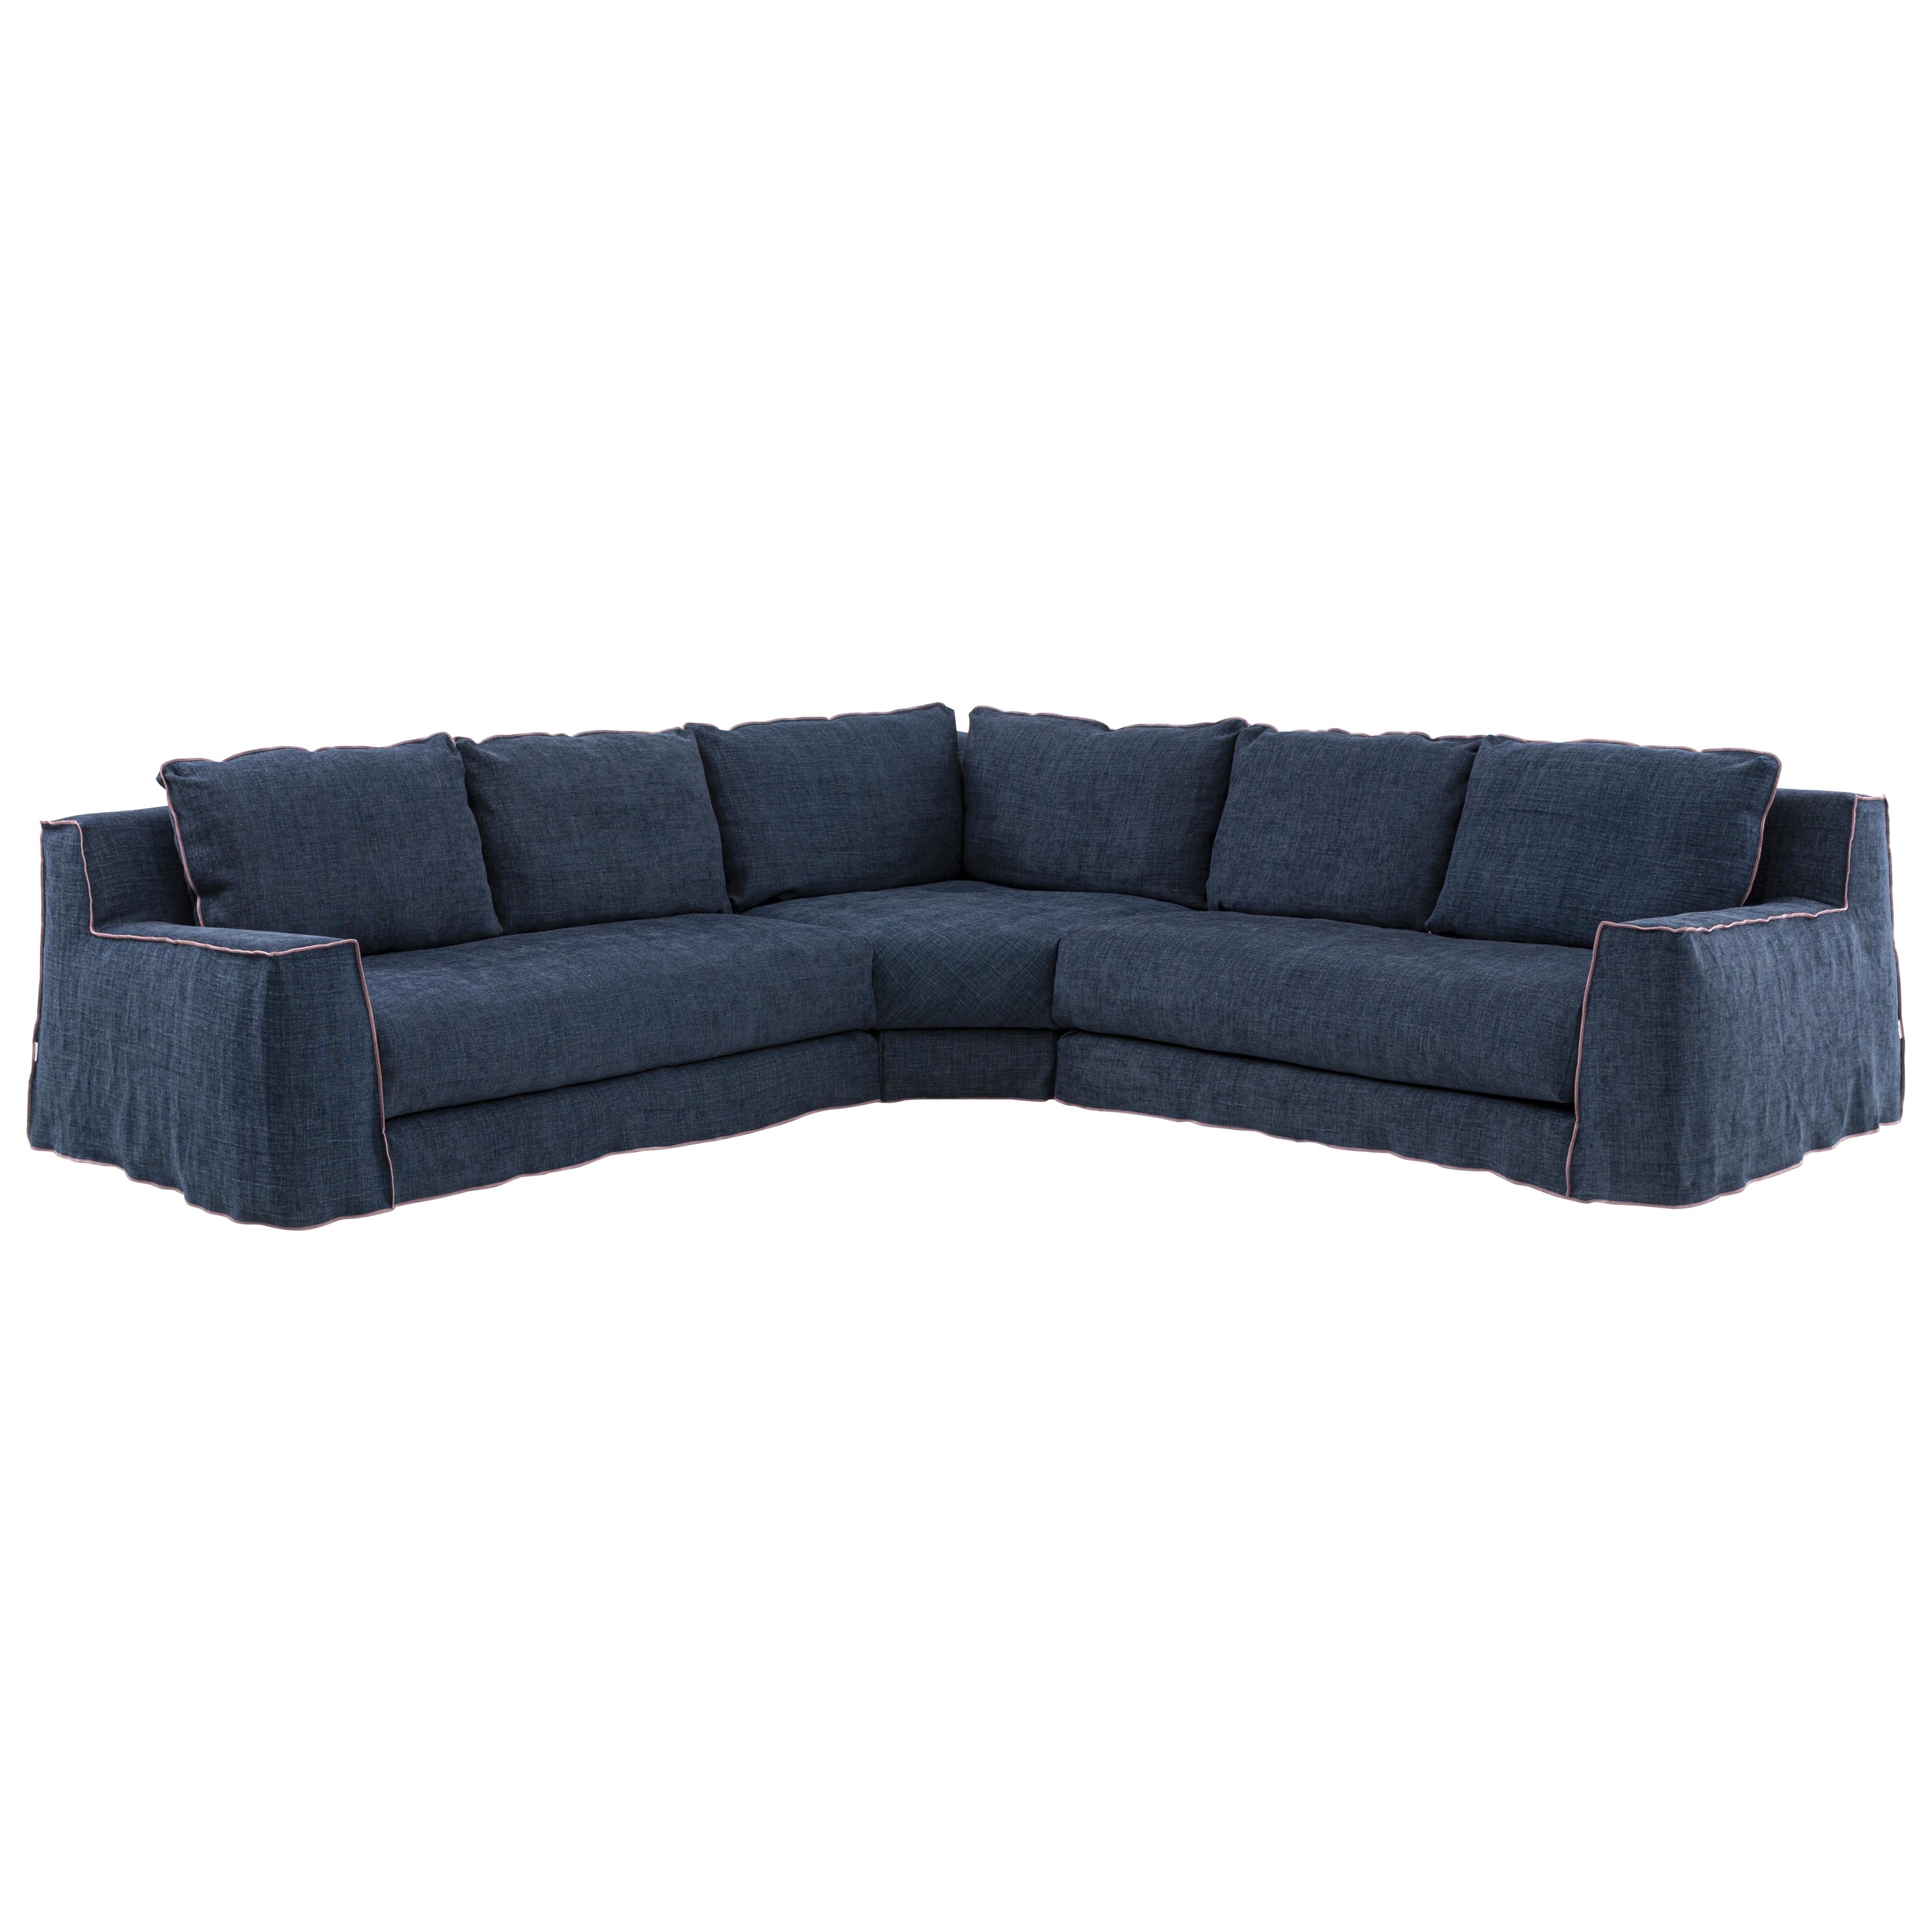 Gervasoni Loll 6 Modular Sofa in Munch Upholstery by Paola Navone For Sale